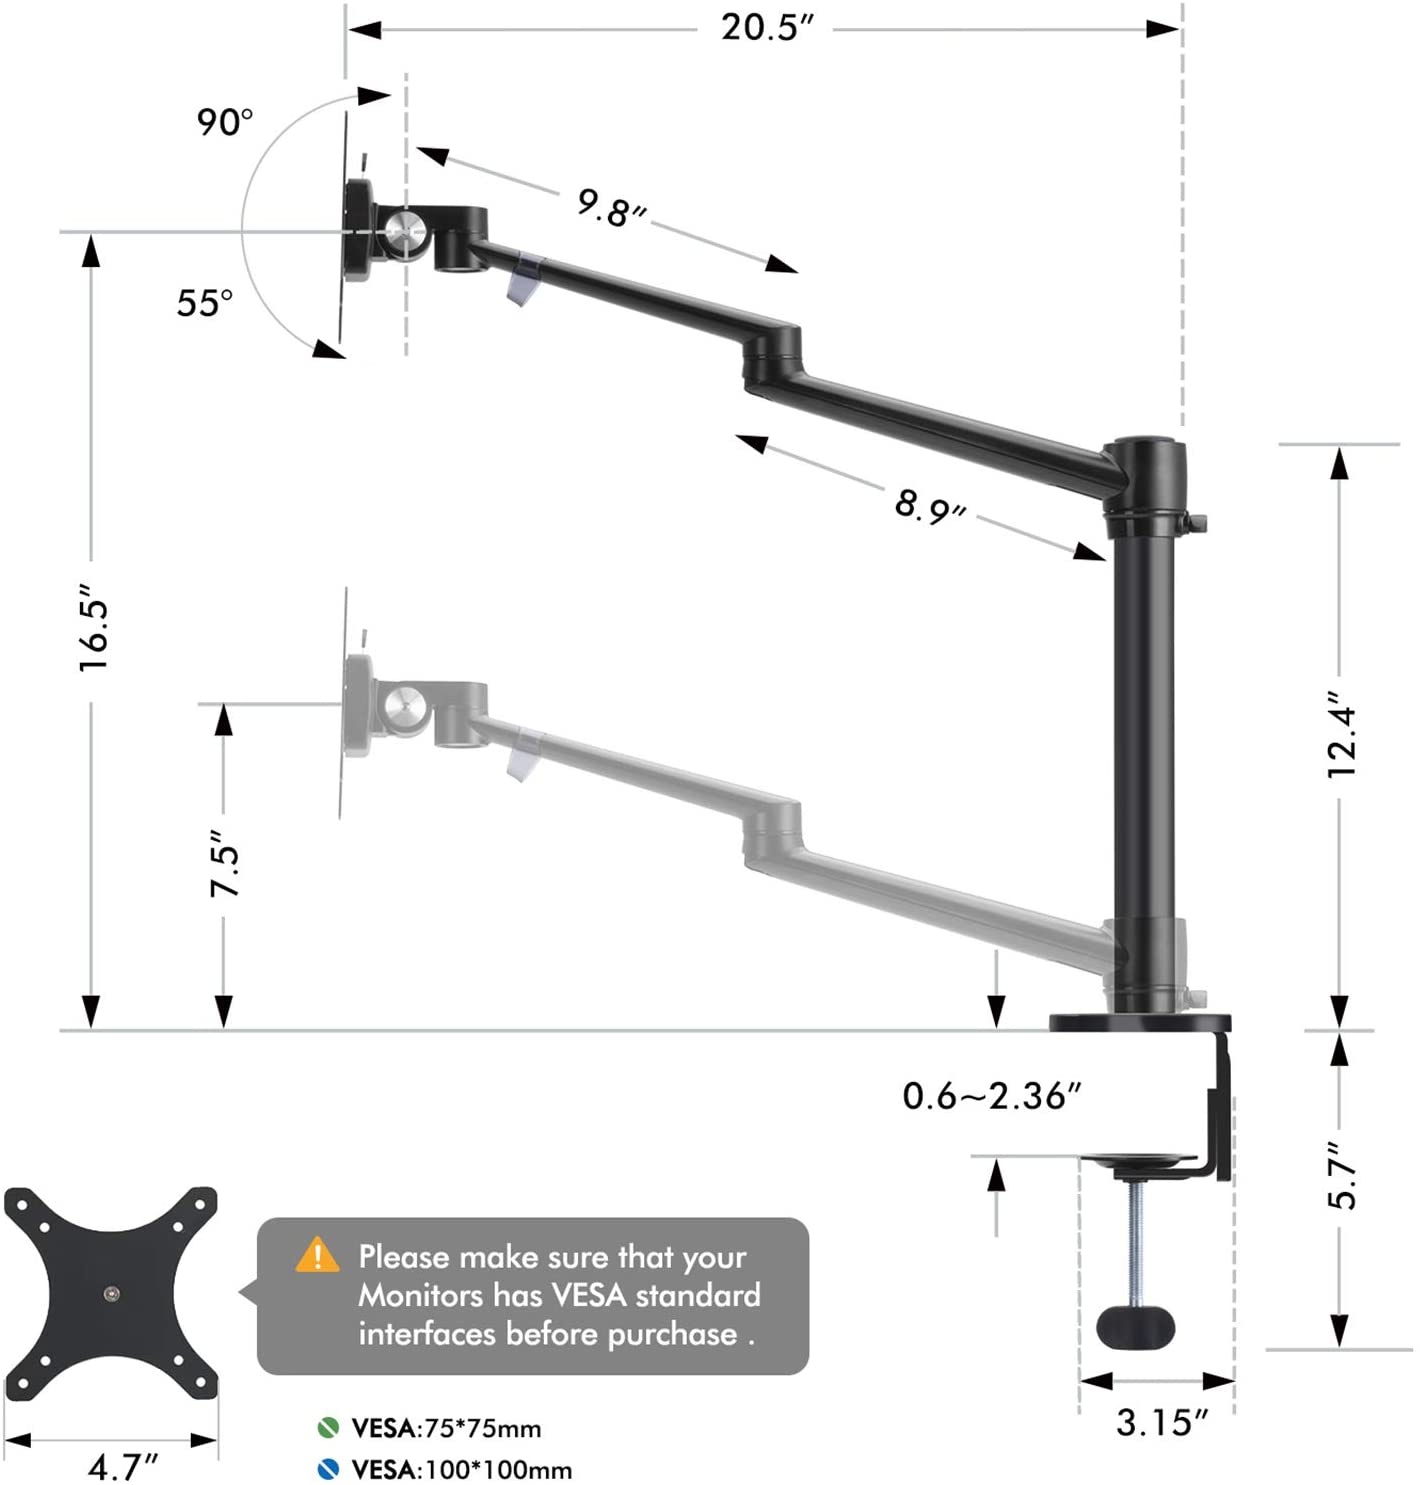 DL Premium Single Arm LCD Monitor Desk Mount Height Adjustable freely swivel Stand for Display up to 32 inch 9kg Weight Capacity